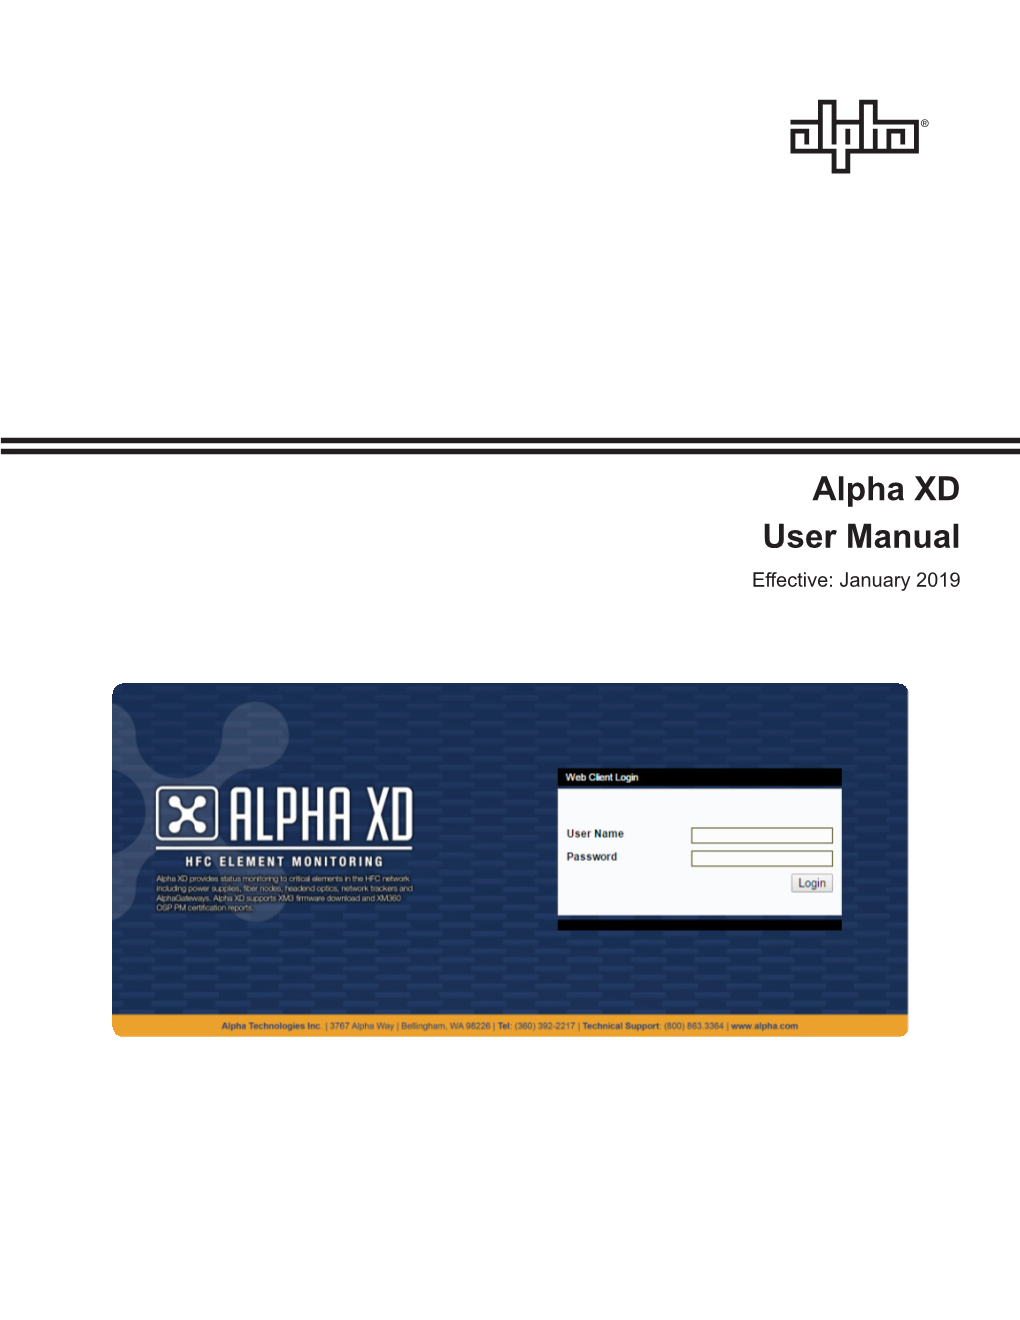 Alpha XD User Manual Effective: January 2019 Safety Notes Alpha Considers Customer Safety and Satisfaction Its Most Important Priority